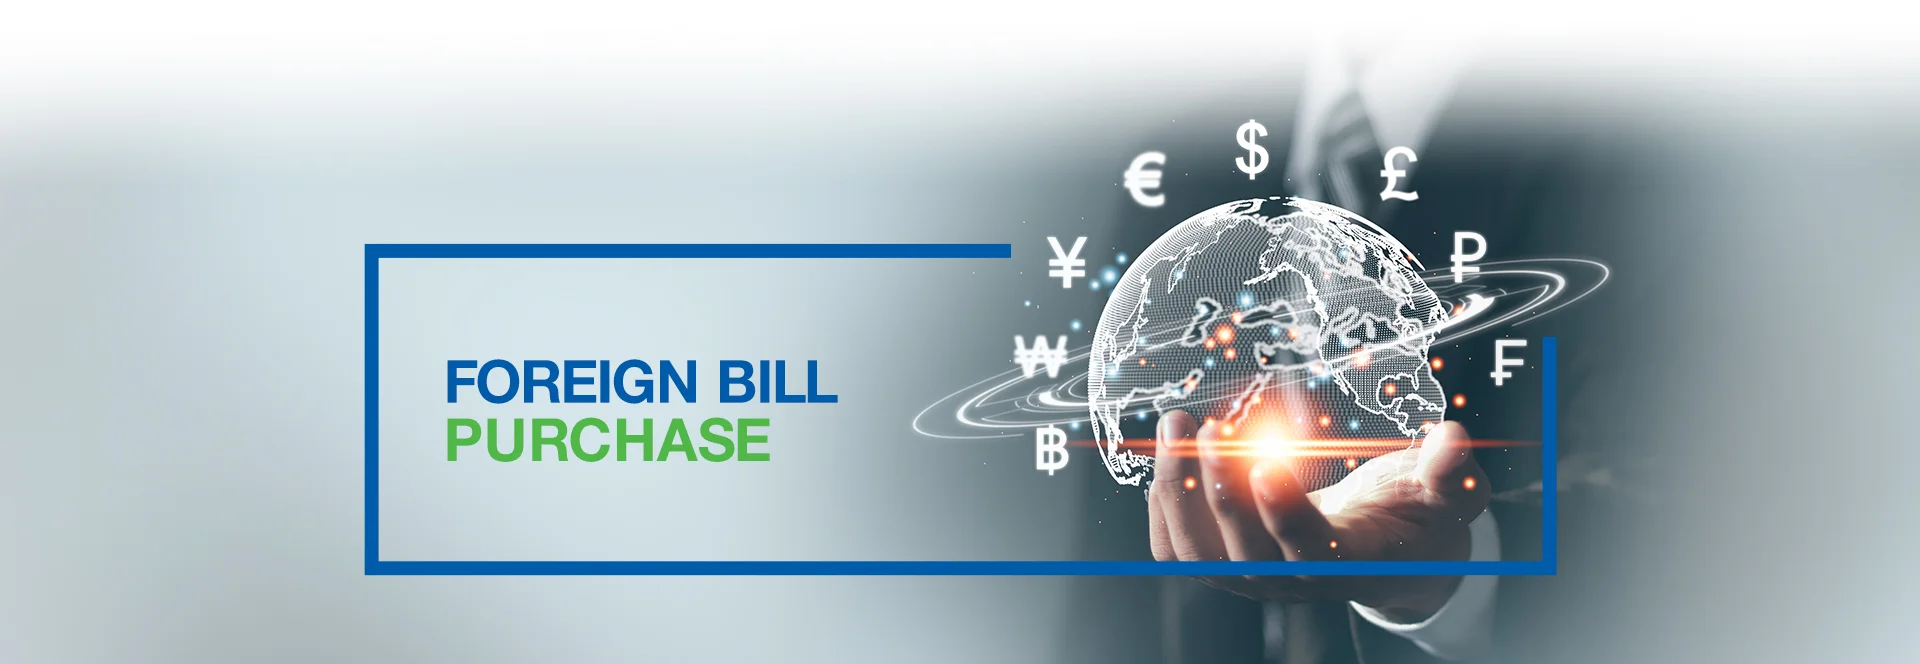 Foreign Bill Purchase (FBP)